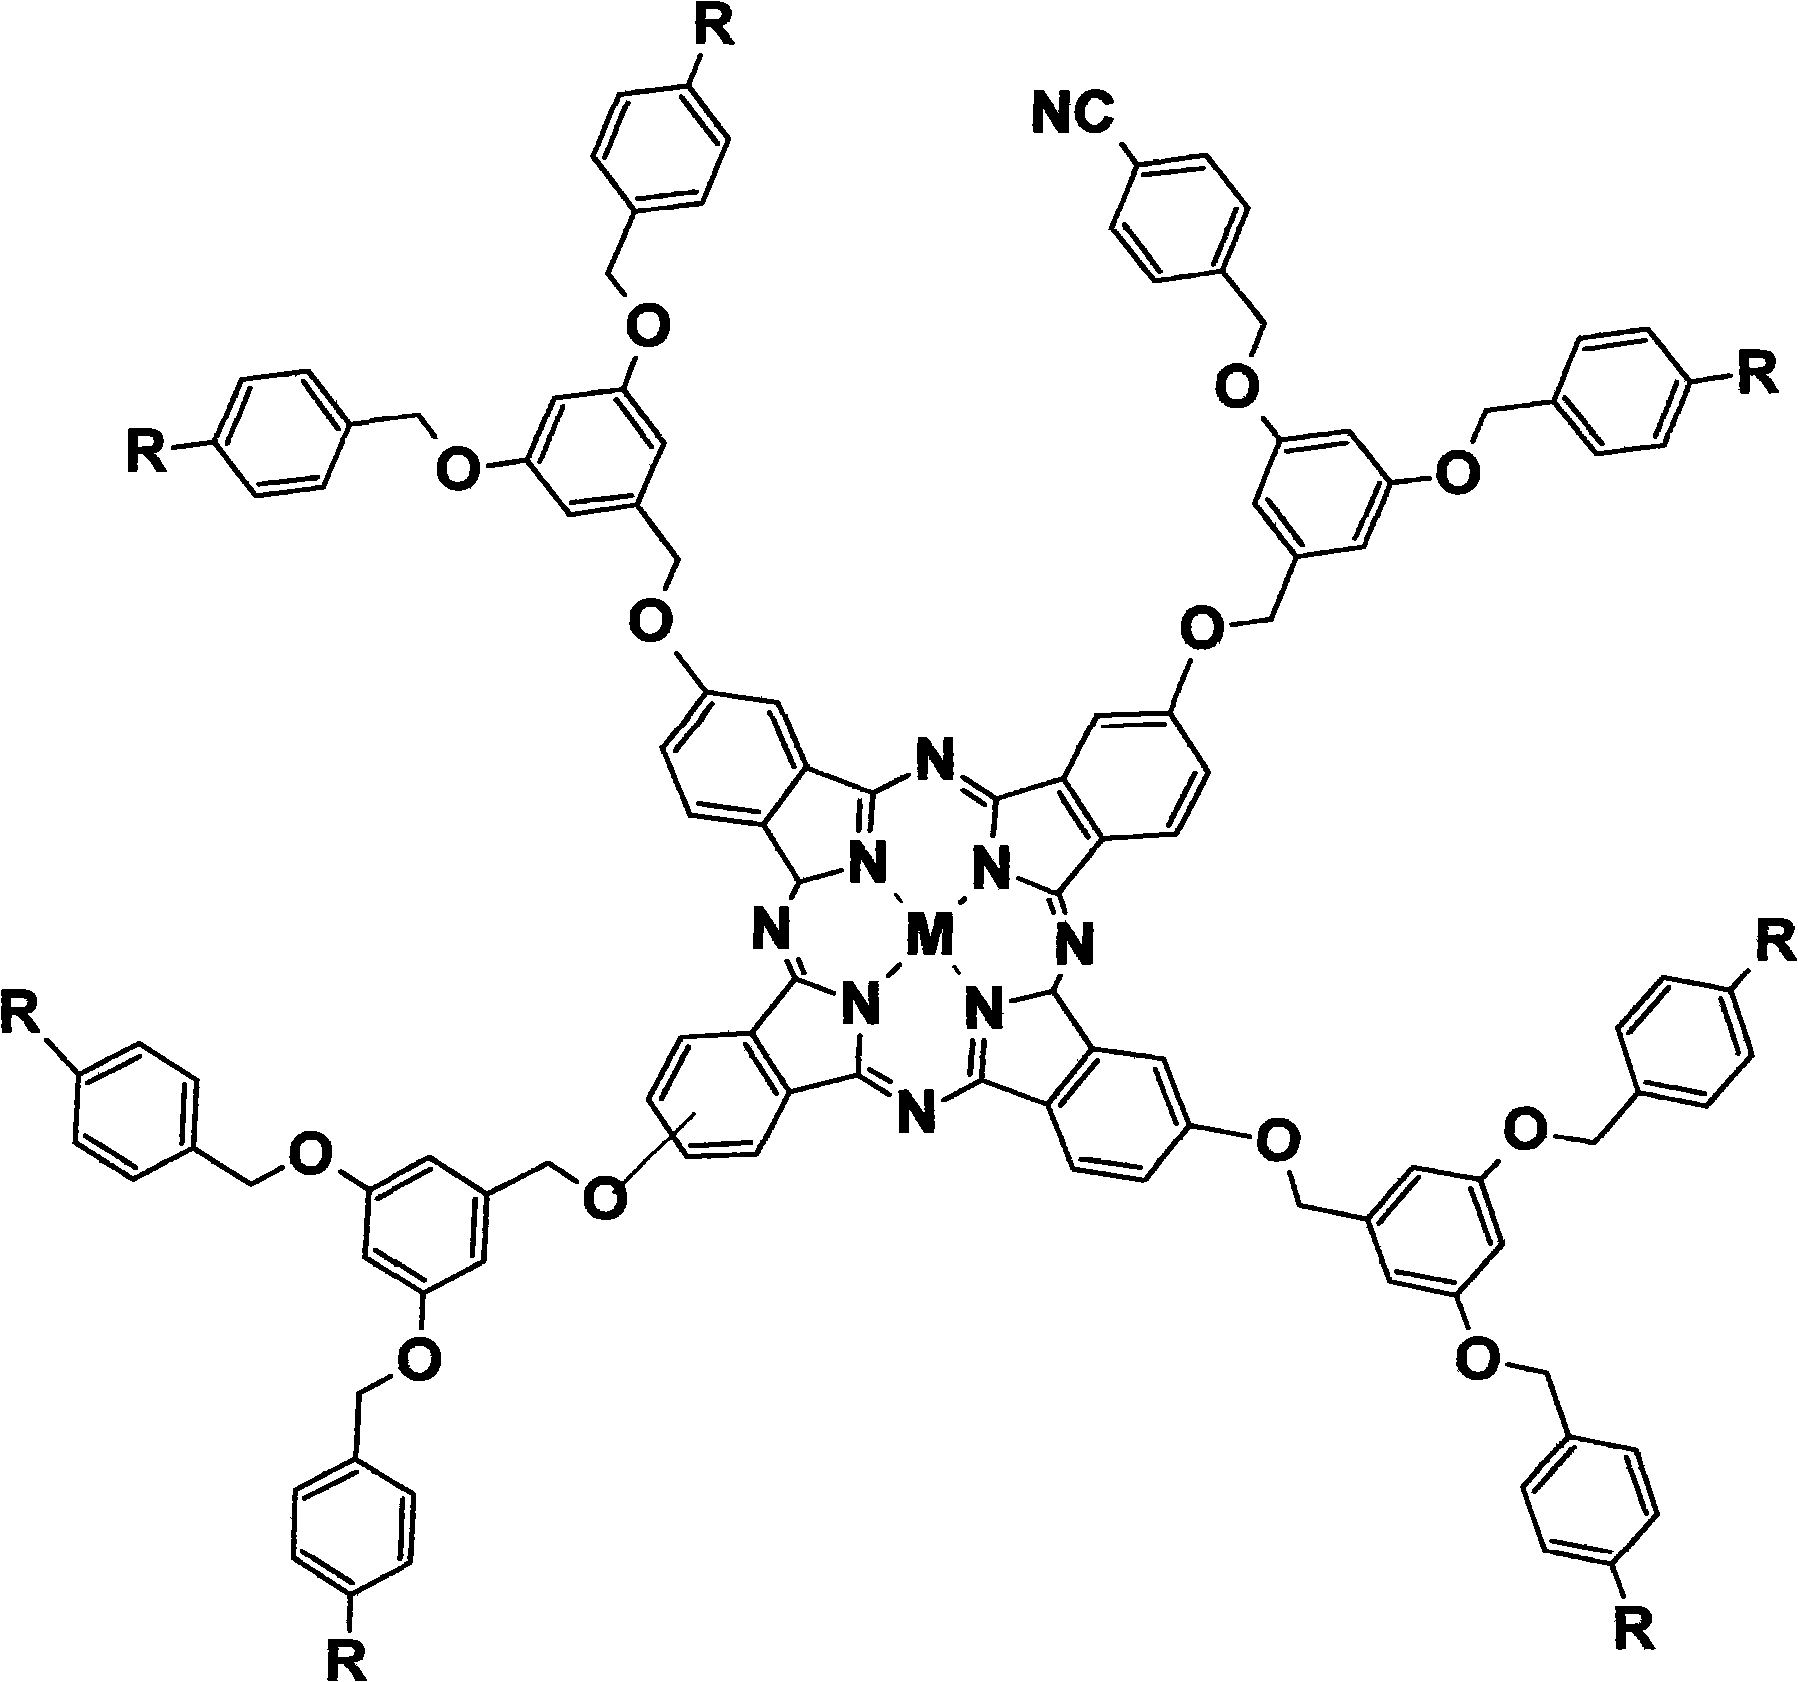 1-3 generation arylene ether dendritic phthalocyanine complex and polymer nano-particle thereof